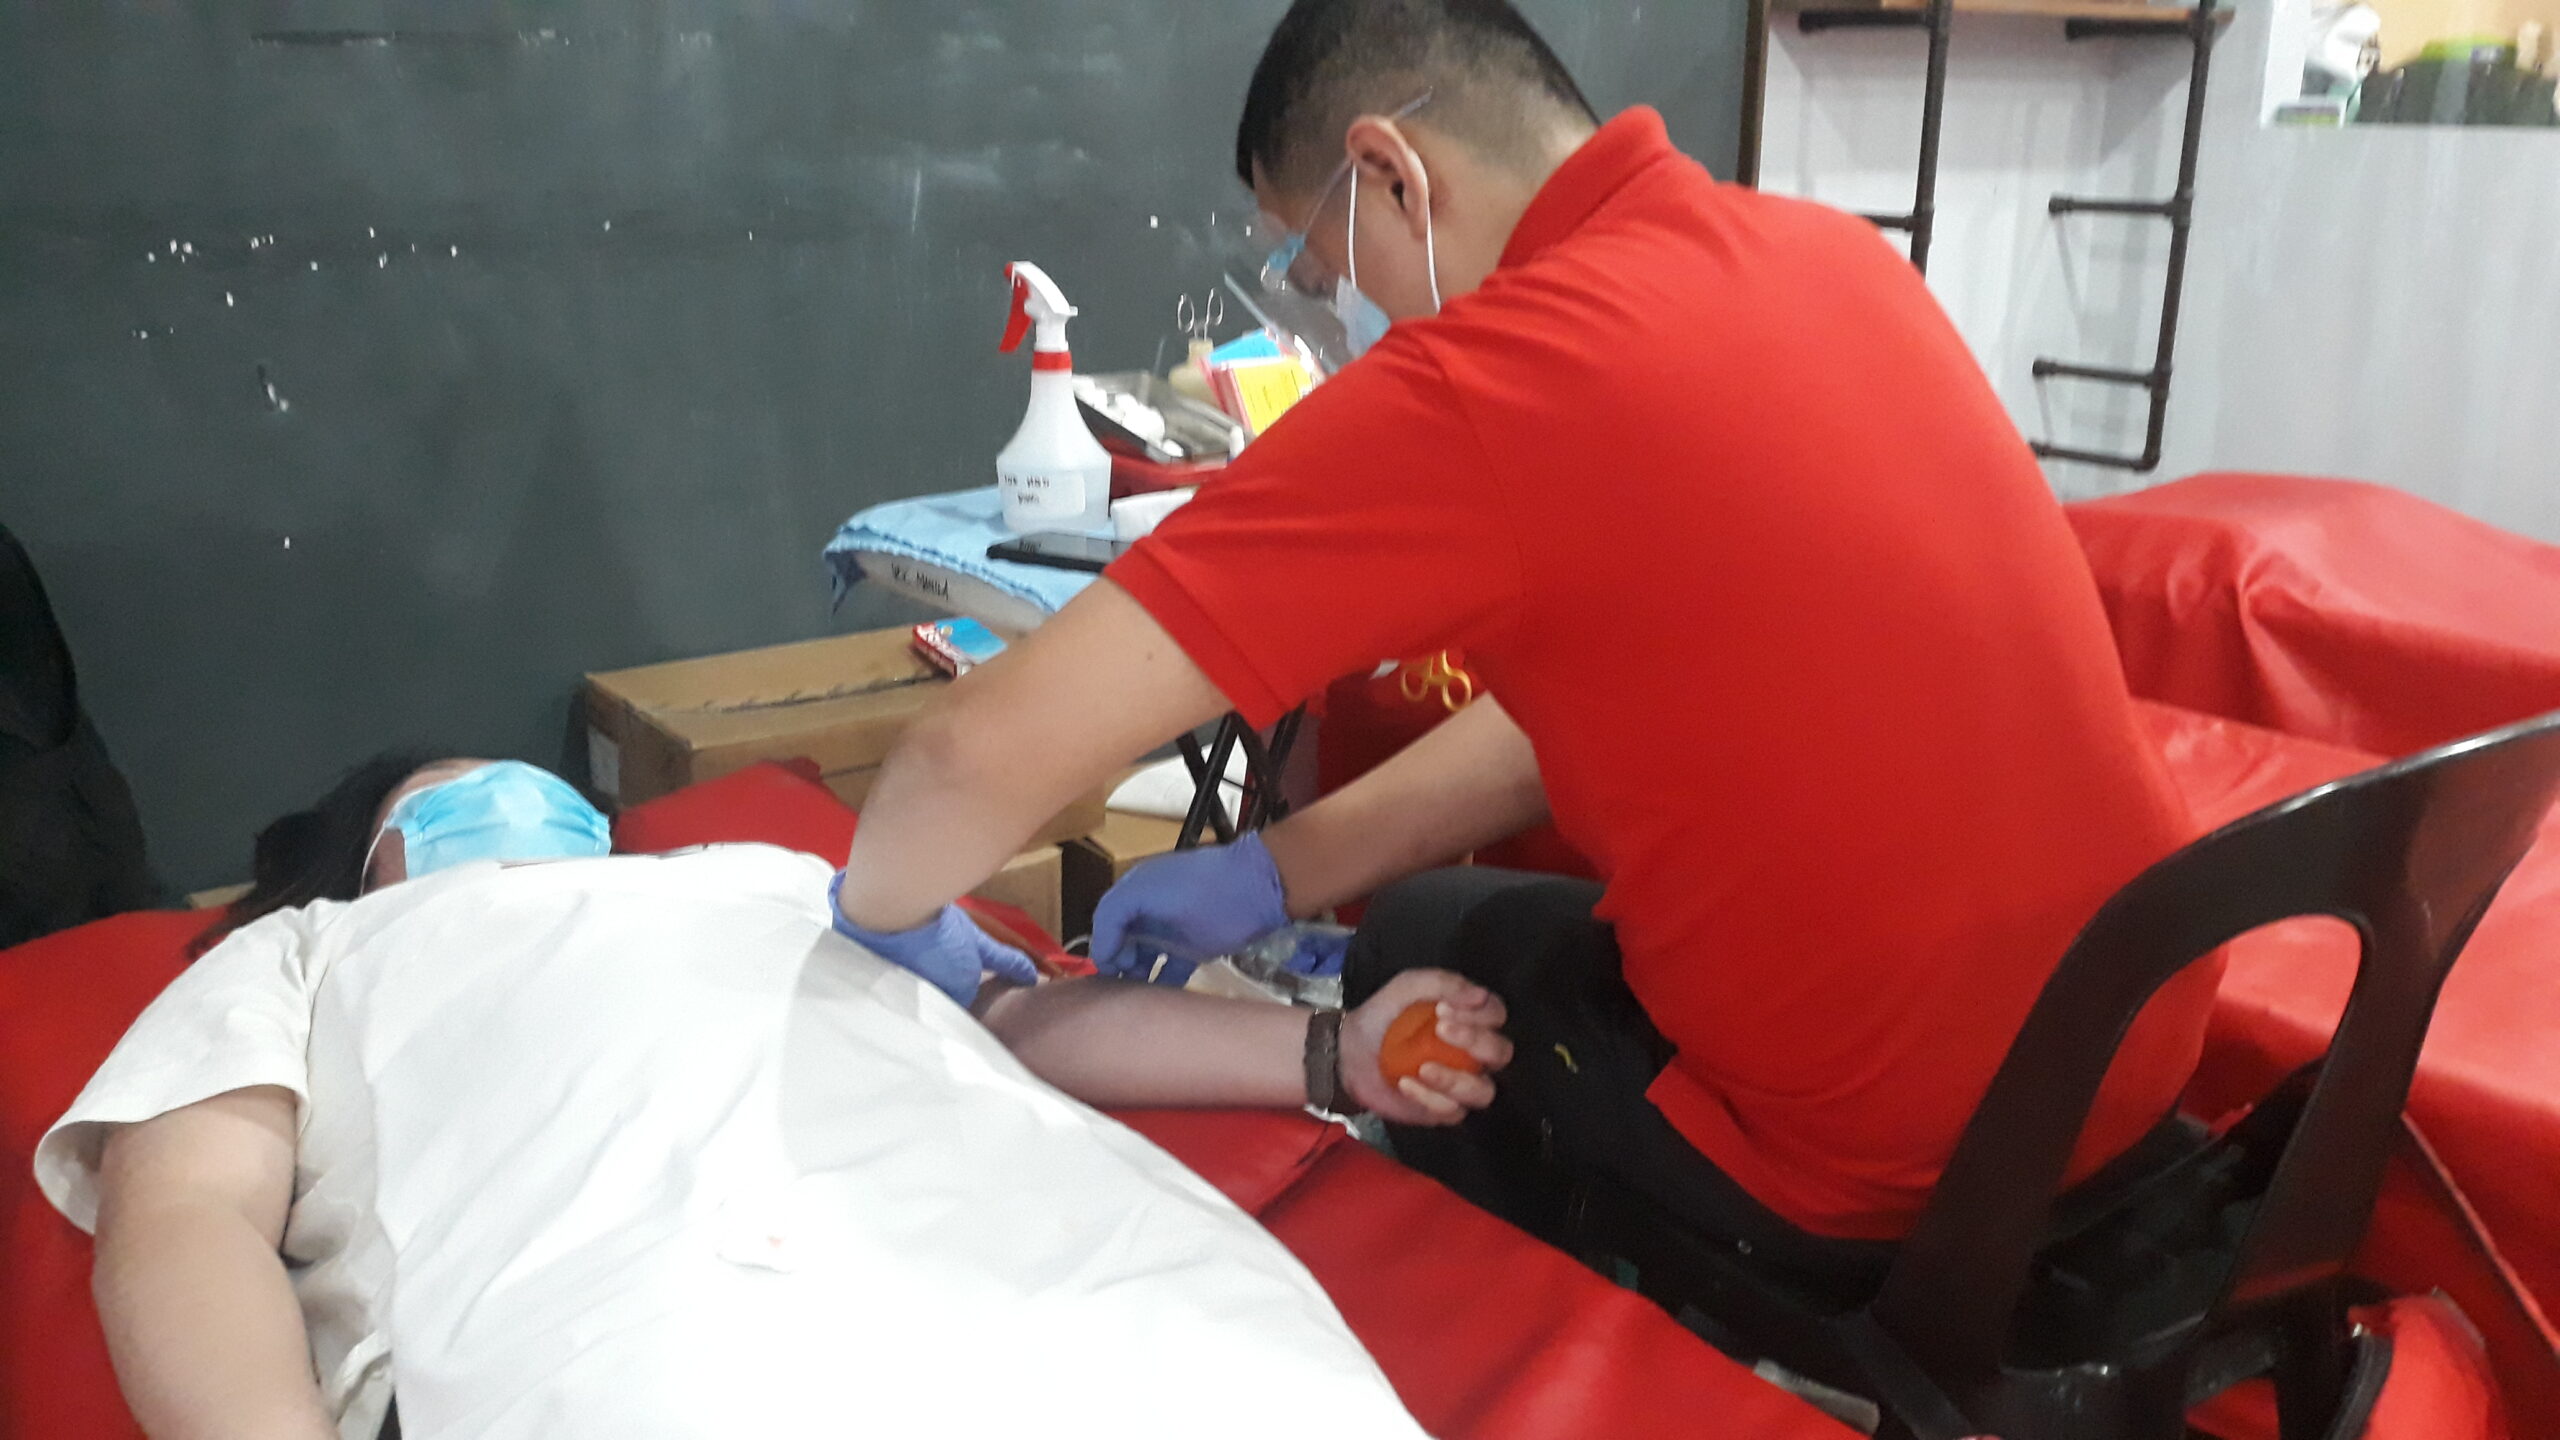 ABE initiates “Give The Gift of Life” – Blood Donation Drive